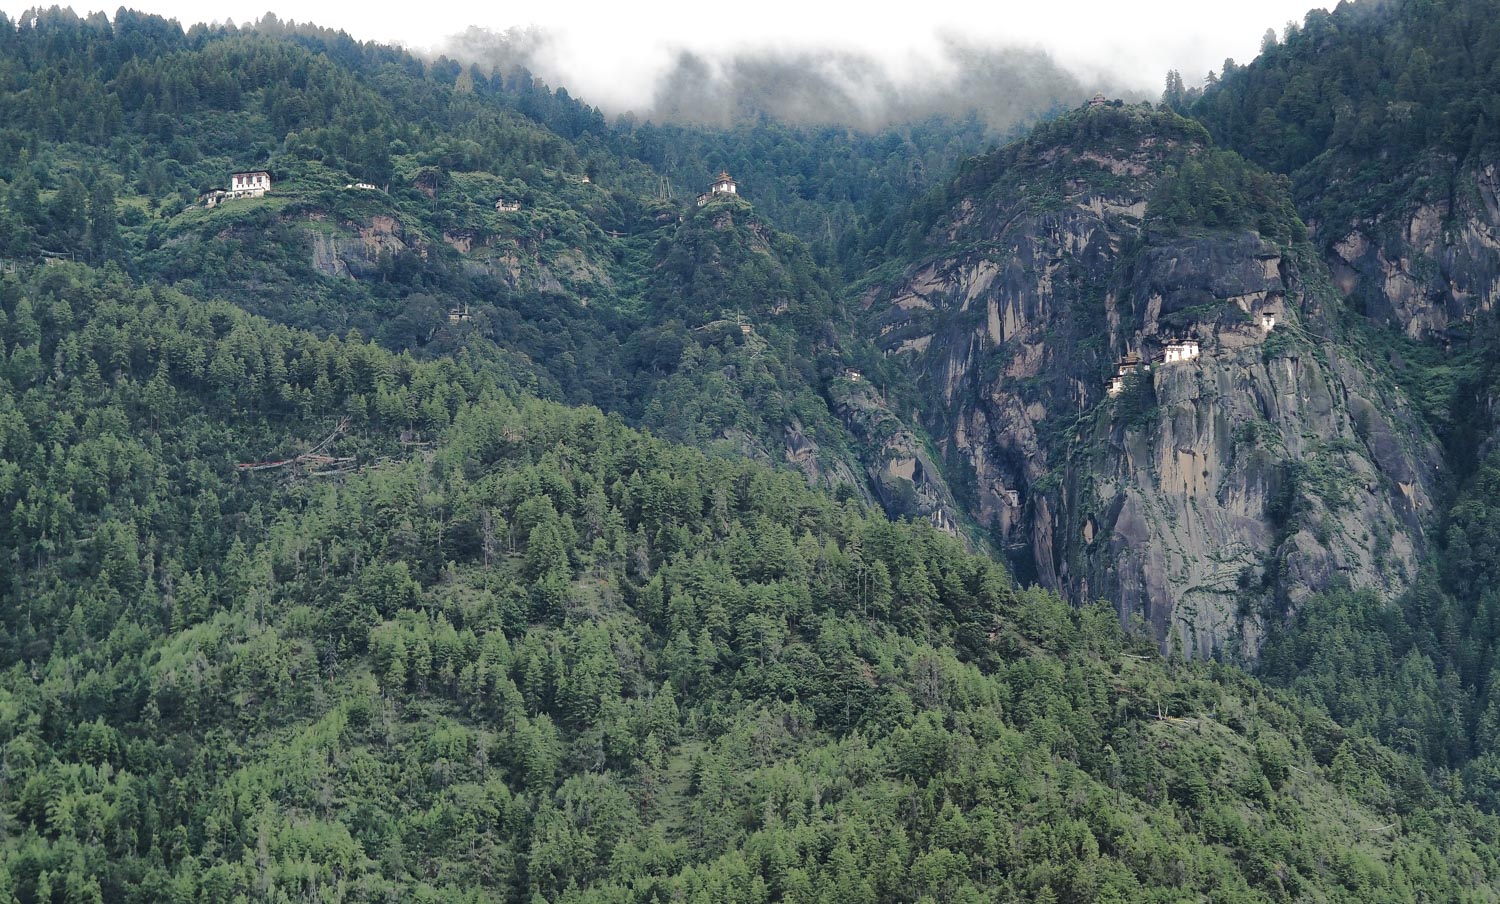 The Tiger Nest up there to the right as seen from the road in Bhutan